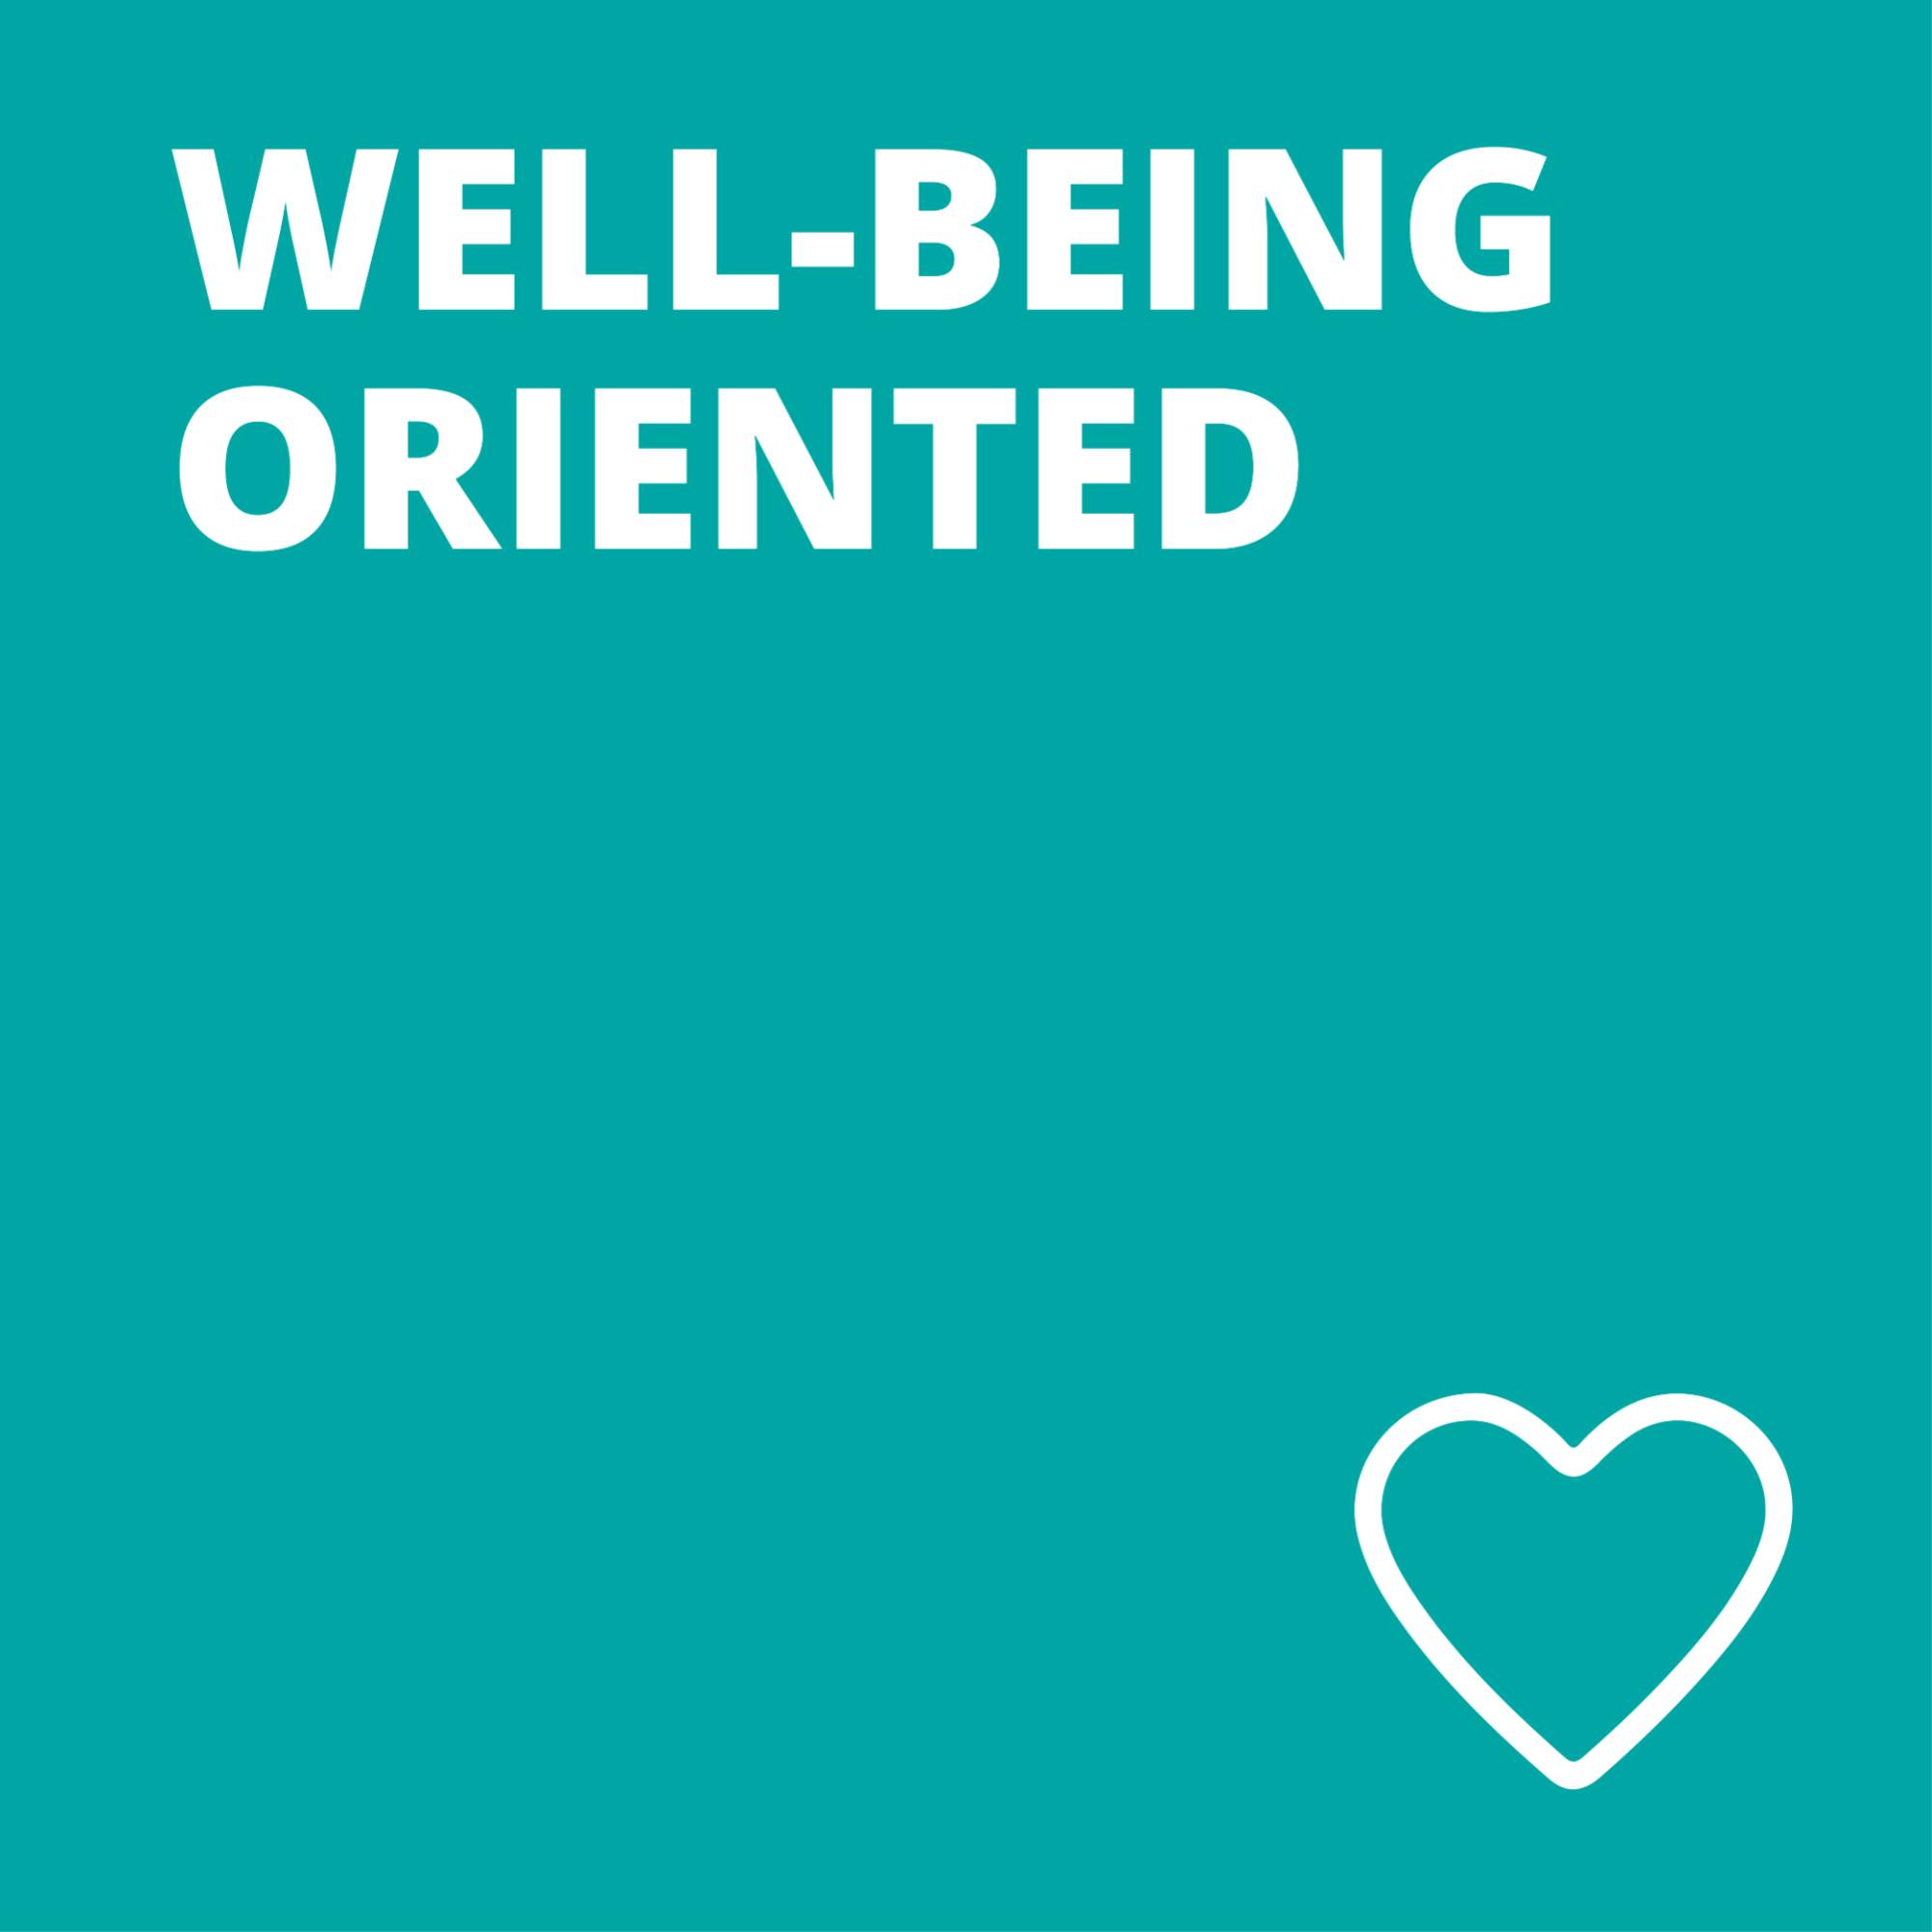 "Well-being Oriented" text with heart icon